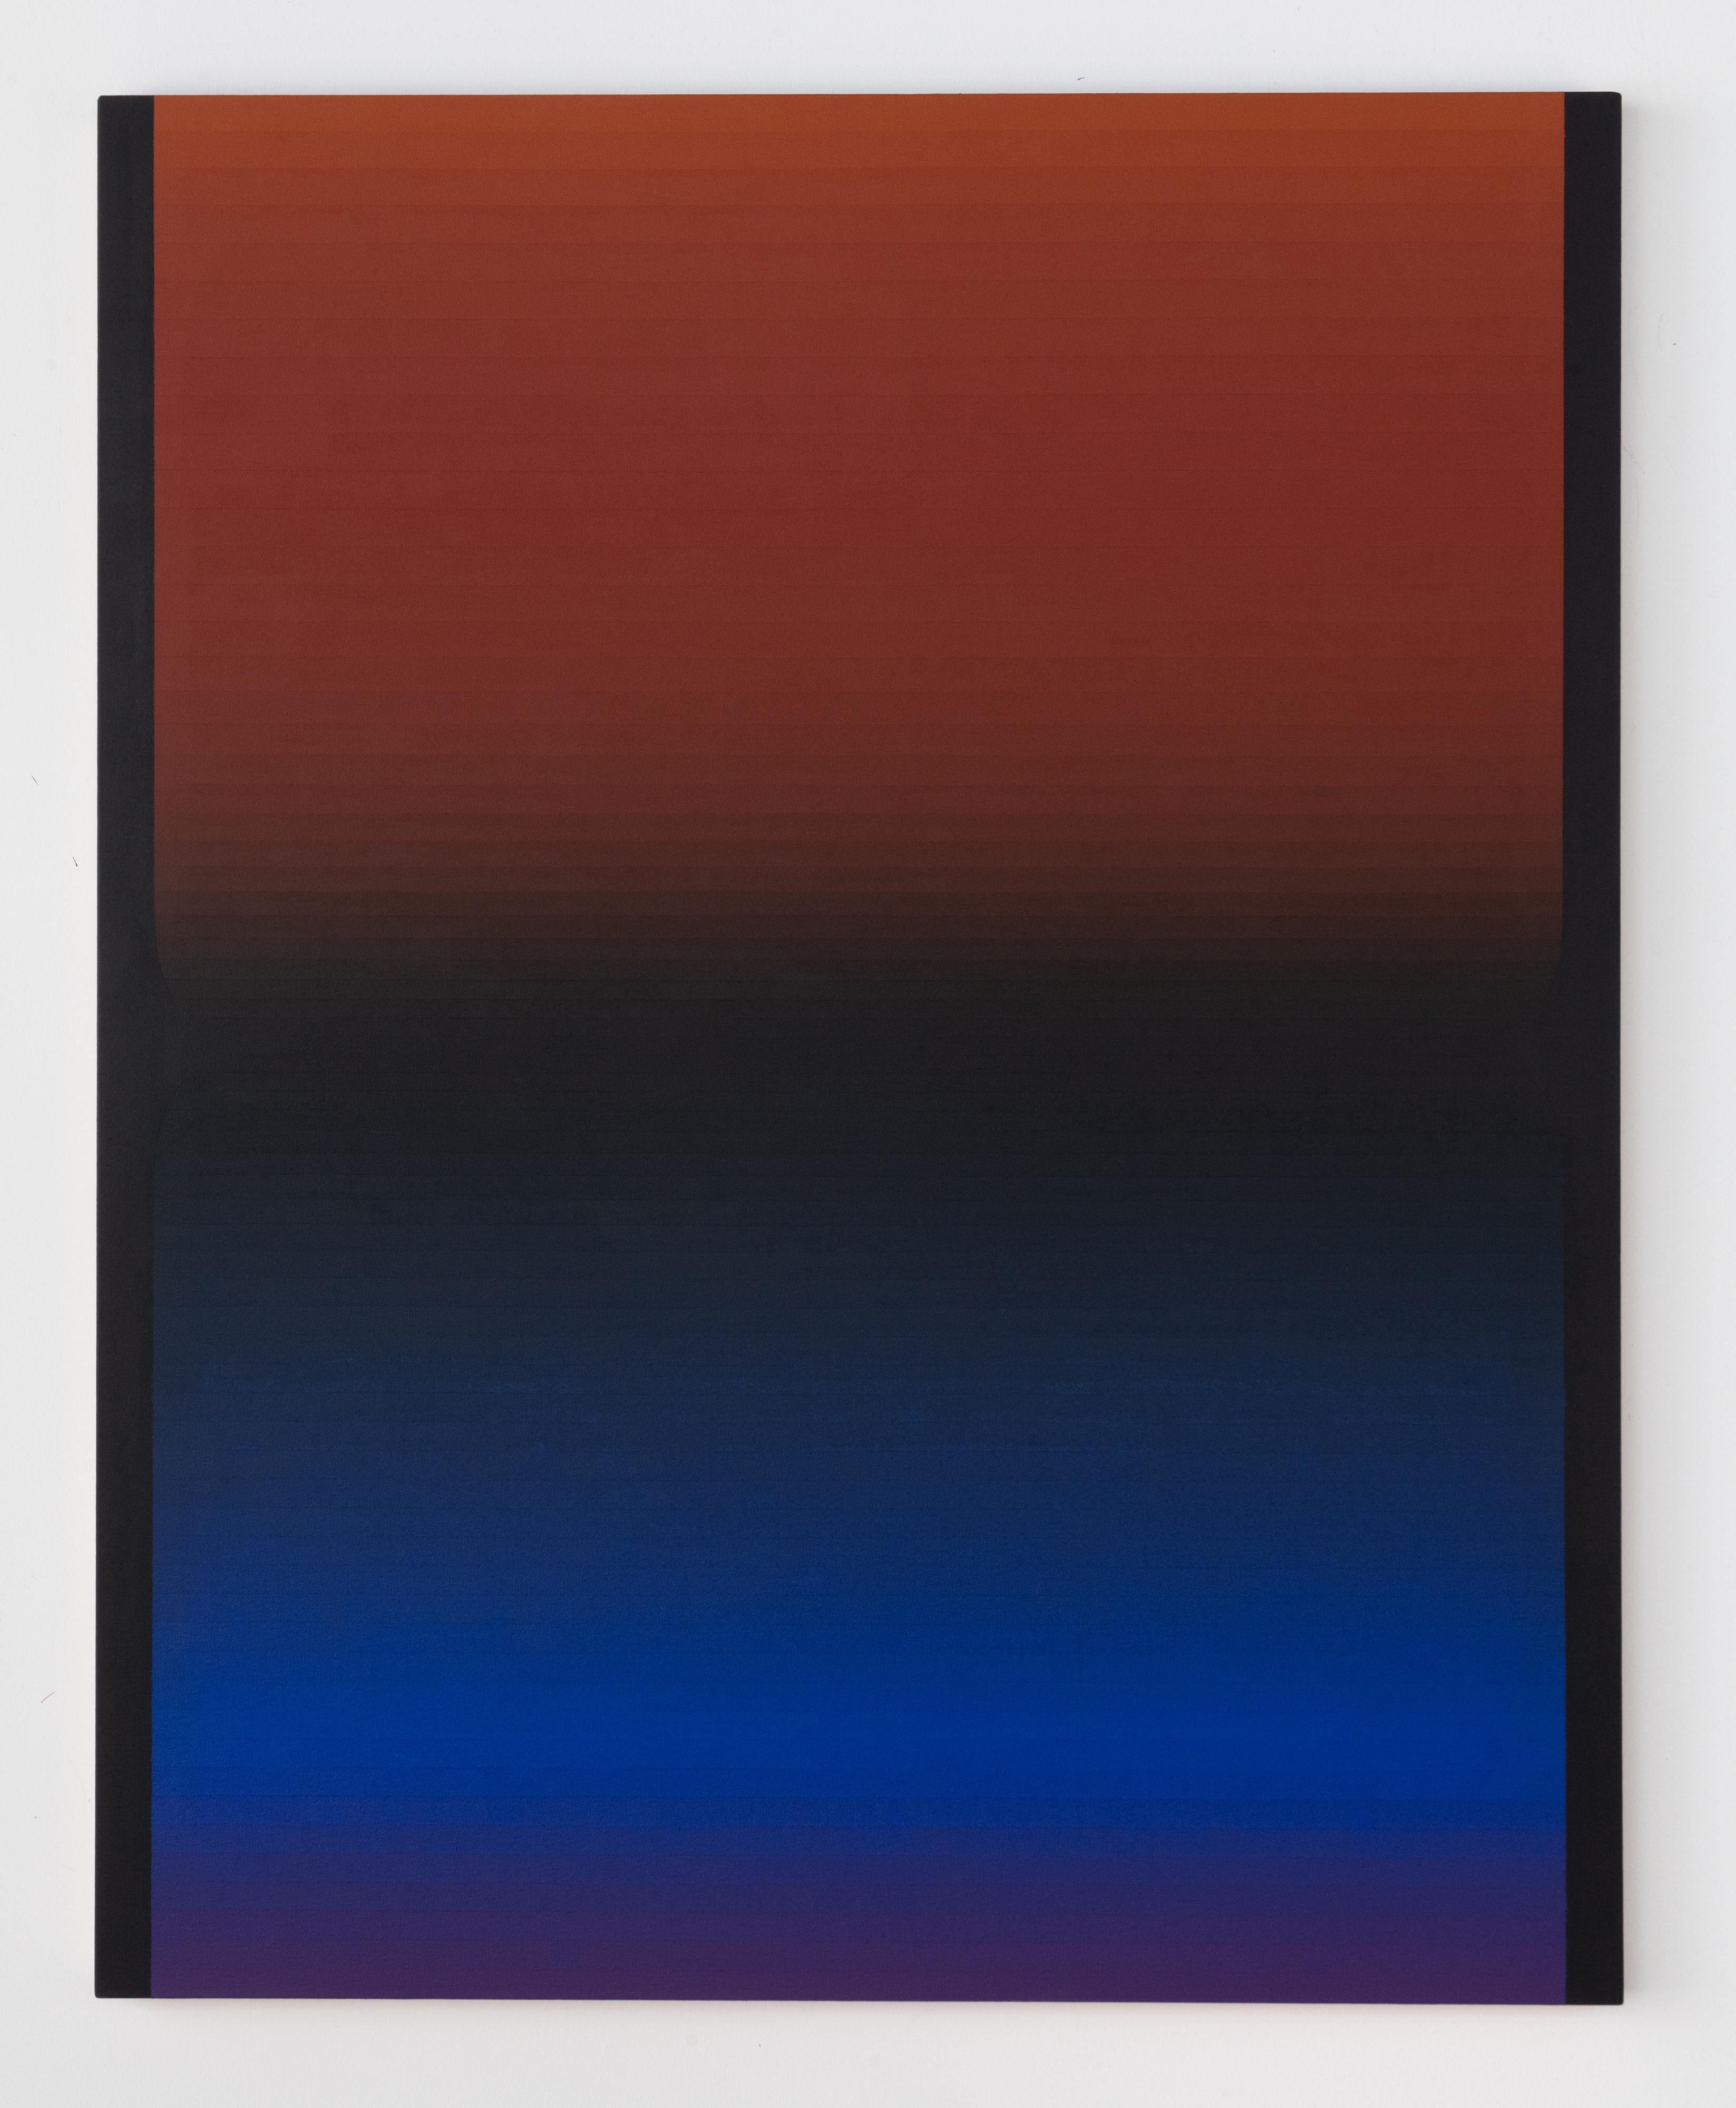 Thin stripes of color in gradient shades of soft hues, start with deep purple, navy blue and indigo at the bottom and transition through dark eggplant to burgundy and reddish orange toward the top. Signed and titled on verso.

Audrey Stone has spent